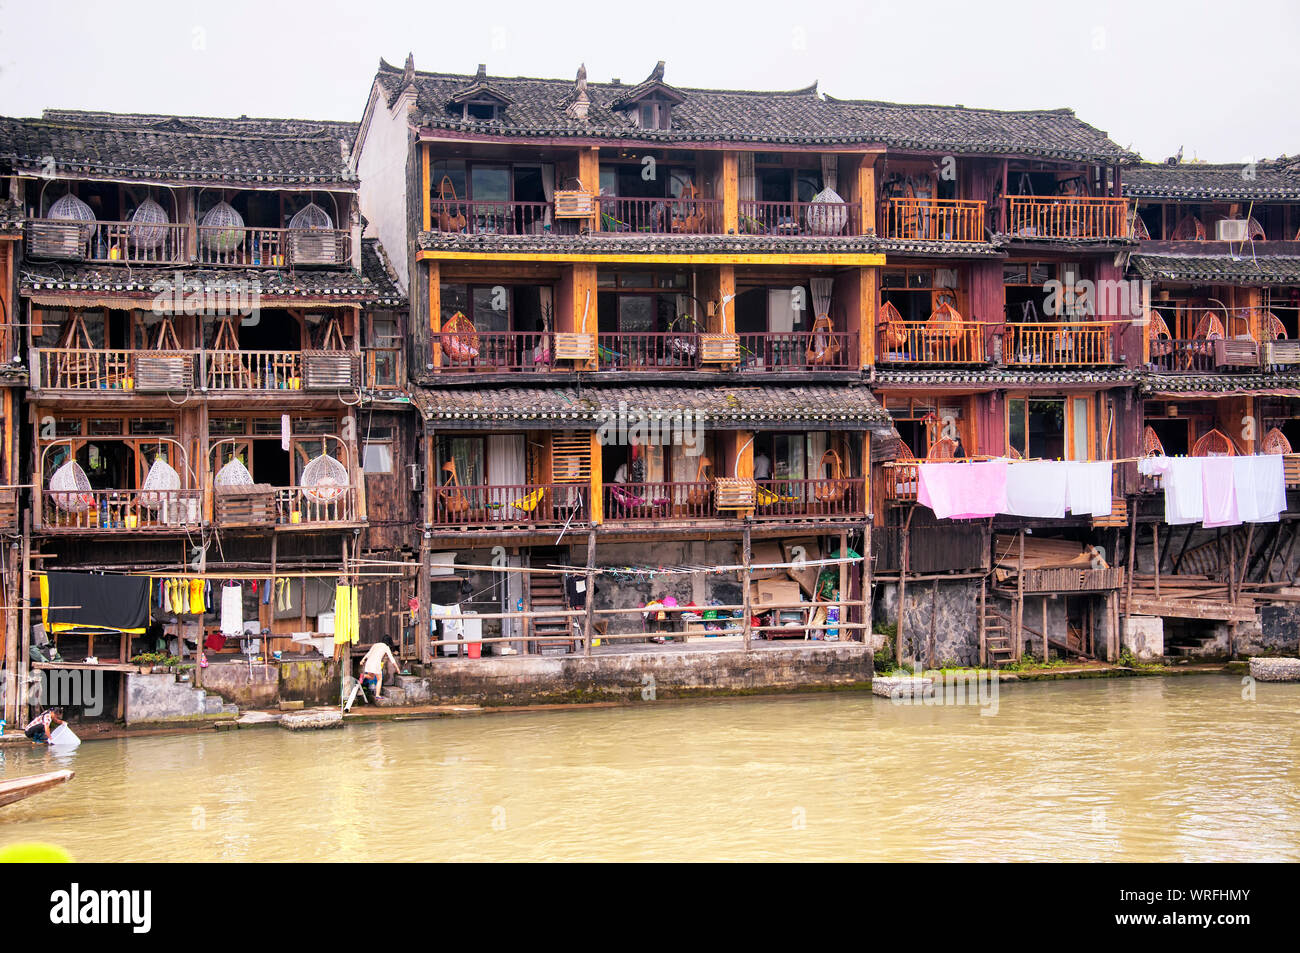 Fenghuang, China. September 13, 2015. Chinesische Häuser und Balkone an den Ufern des Tuo Jiang River in Fenghuang antike Stadt in Hunan prov Stockfoto